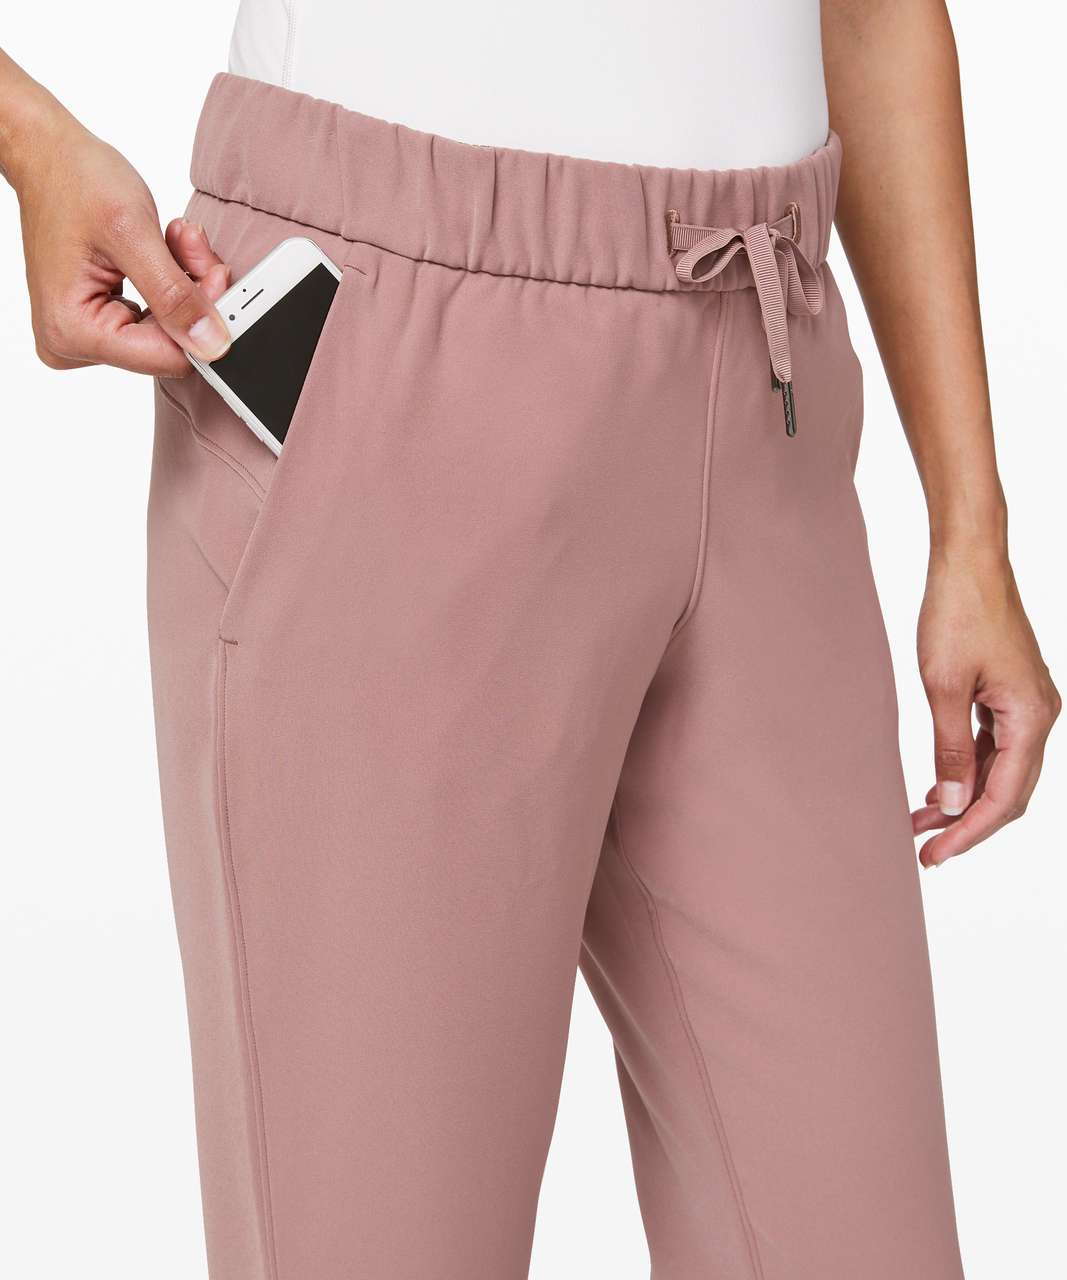 Lululemon On the Fly 7/8 Pant *Woven - Red Dust